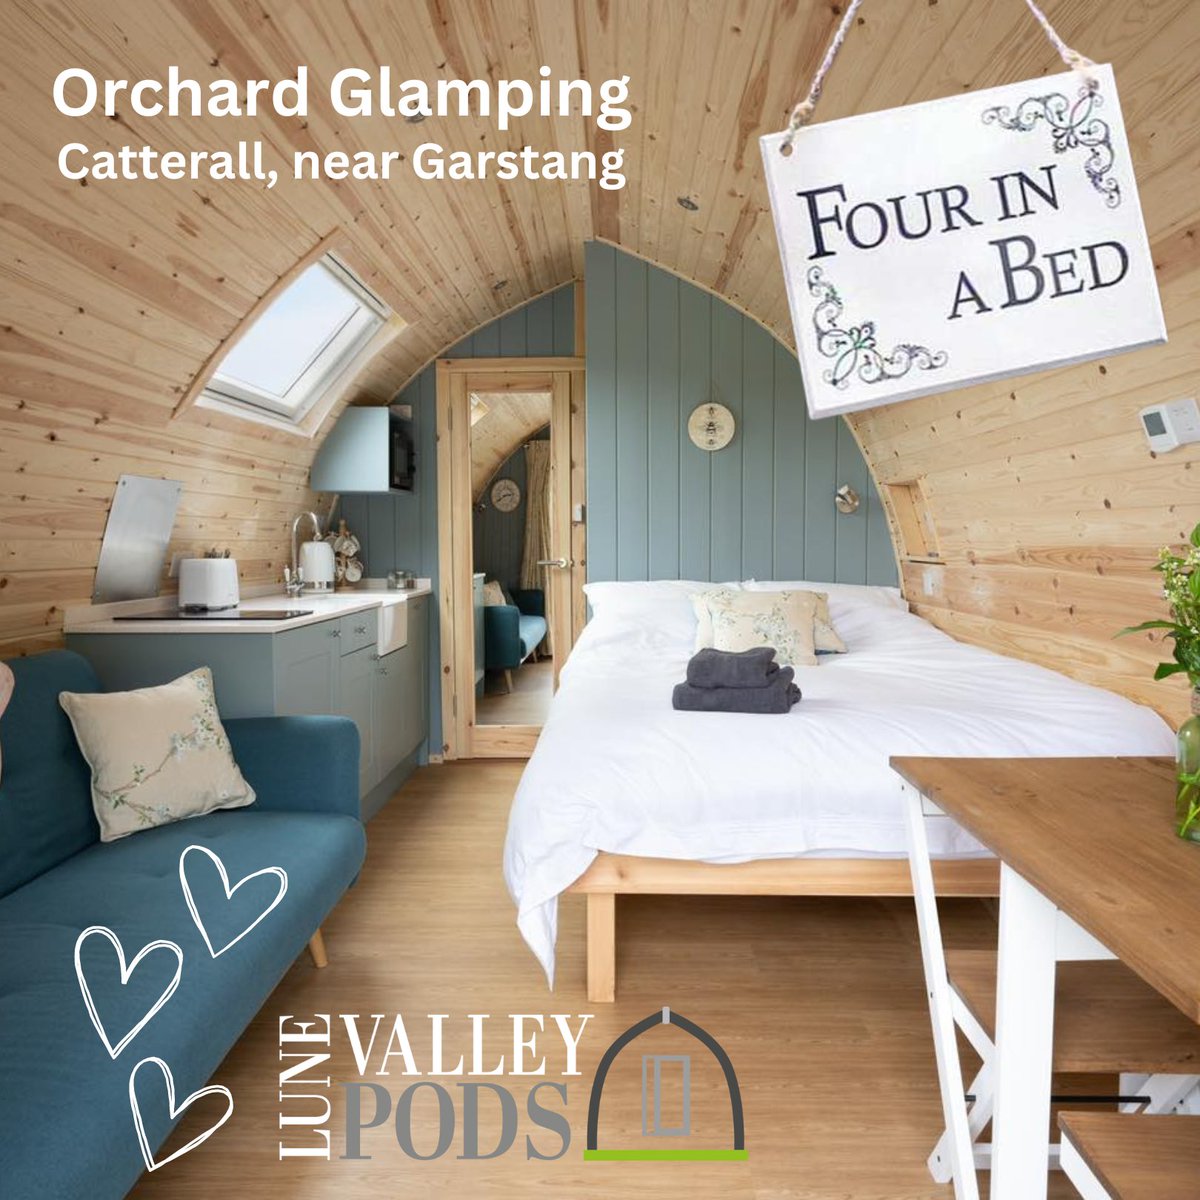 Don’t miss the #LuneValleyPods showcasing tonight on Channel 4's FOUR IN A BED at 5pm!! 📺

#FourInaBed #Channel4 #TV #FilmingLocation #Glamping #GlampingPods #GlampingLife #LVP #LuneValleyPods #LuxuryVisionPerfection